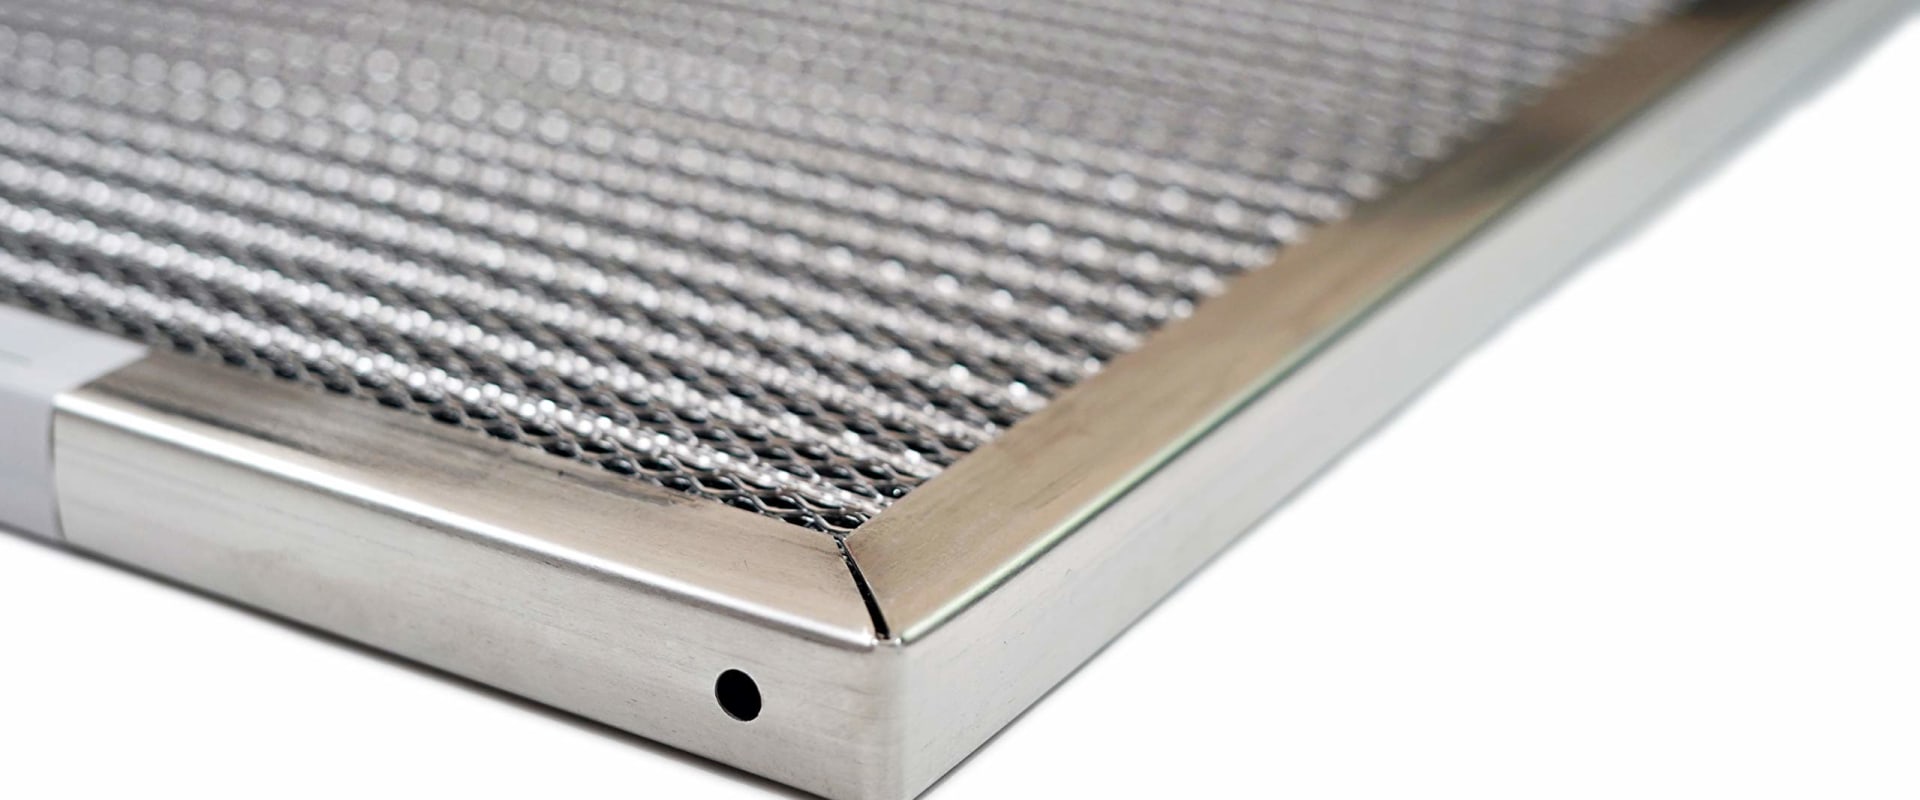 How Often Should You Change Your Electrostatic or Activated Carbon 20x25x1 Air Filters?